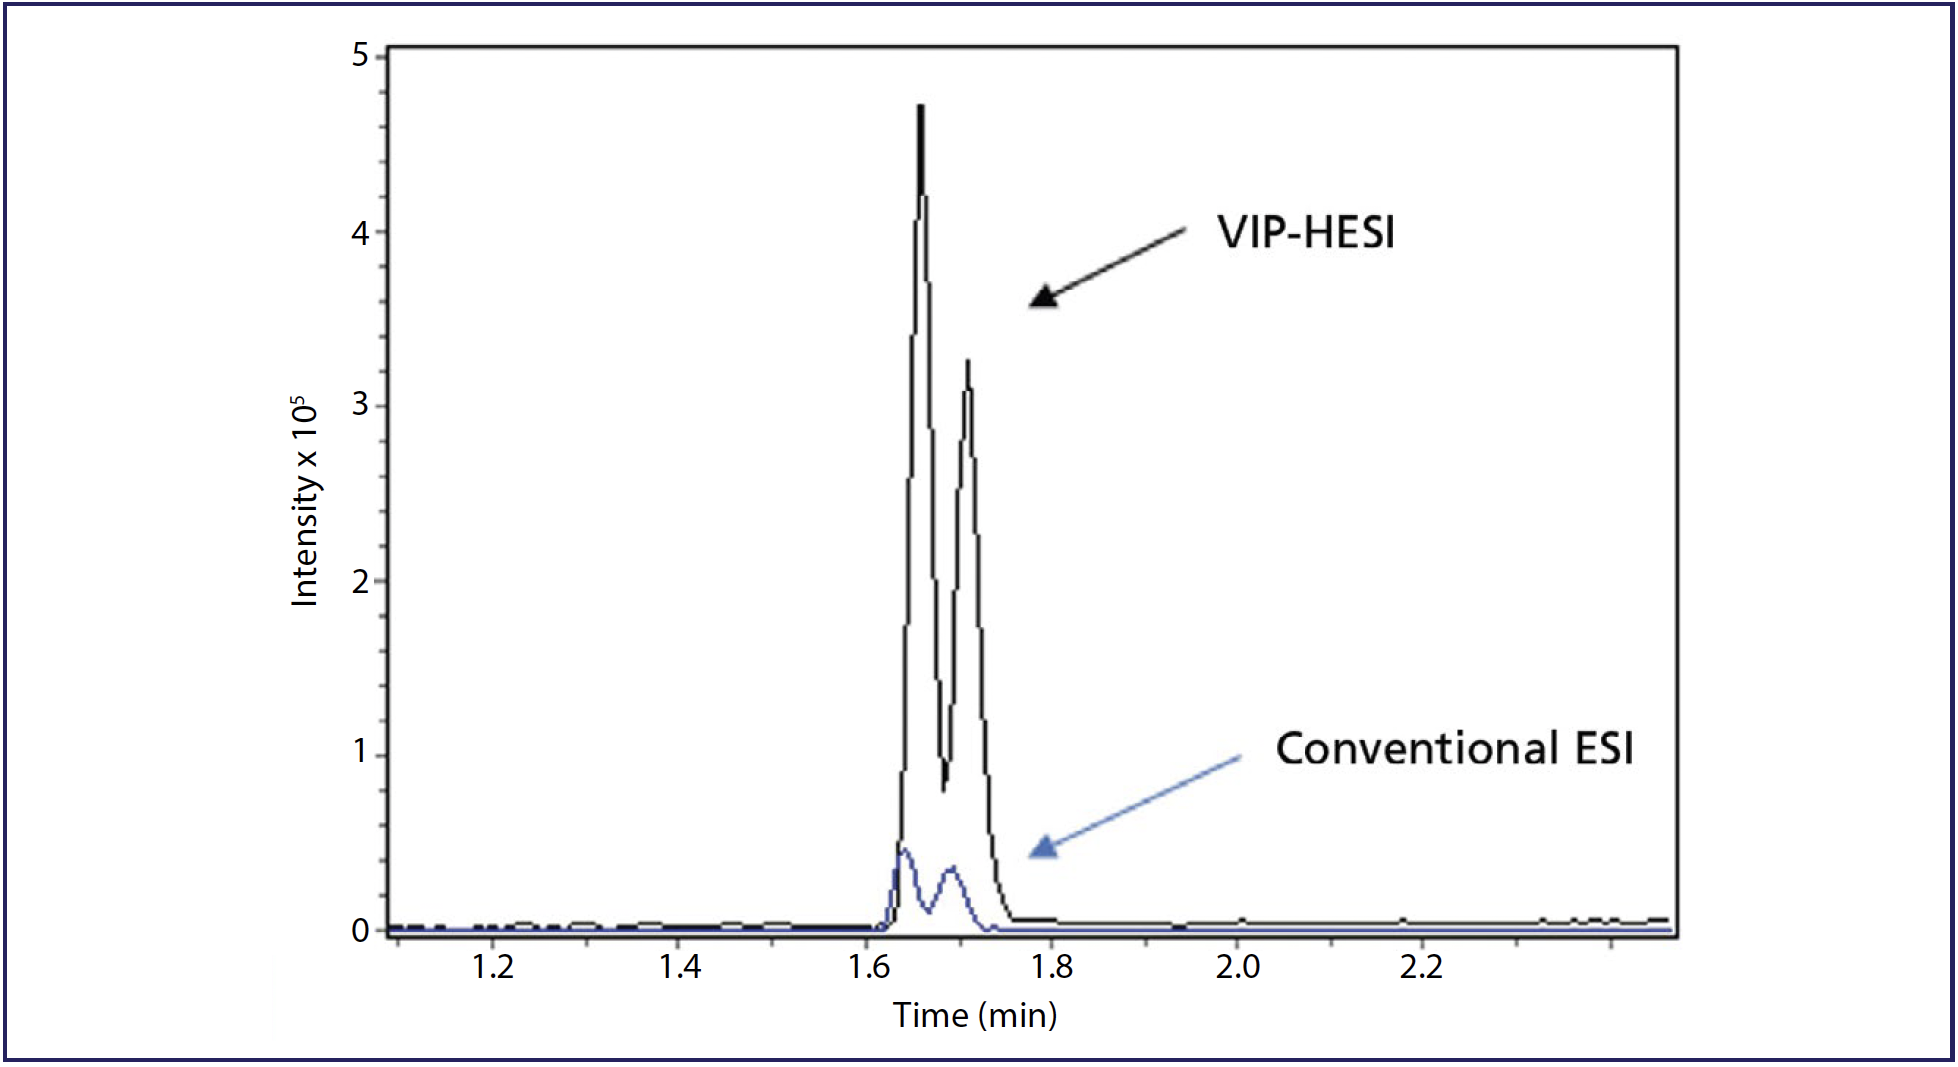 FIGURE 1: Illustration of the differences in metabolite sensitivity between VIP-HESI and conventional ESI.